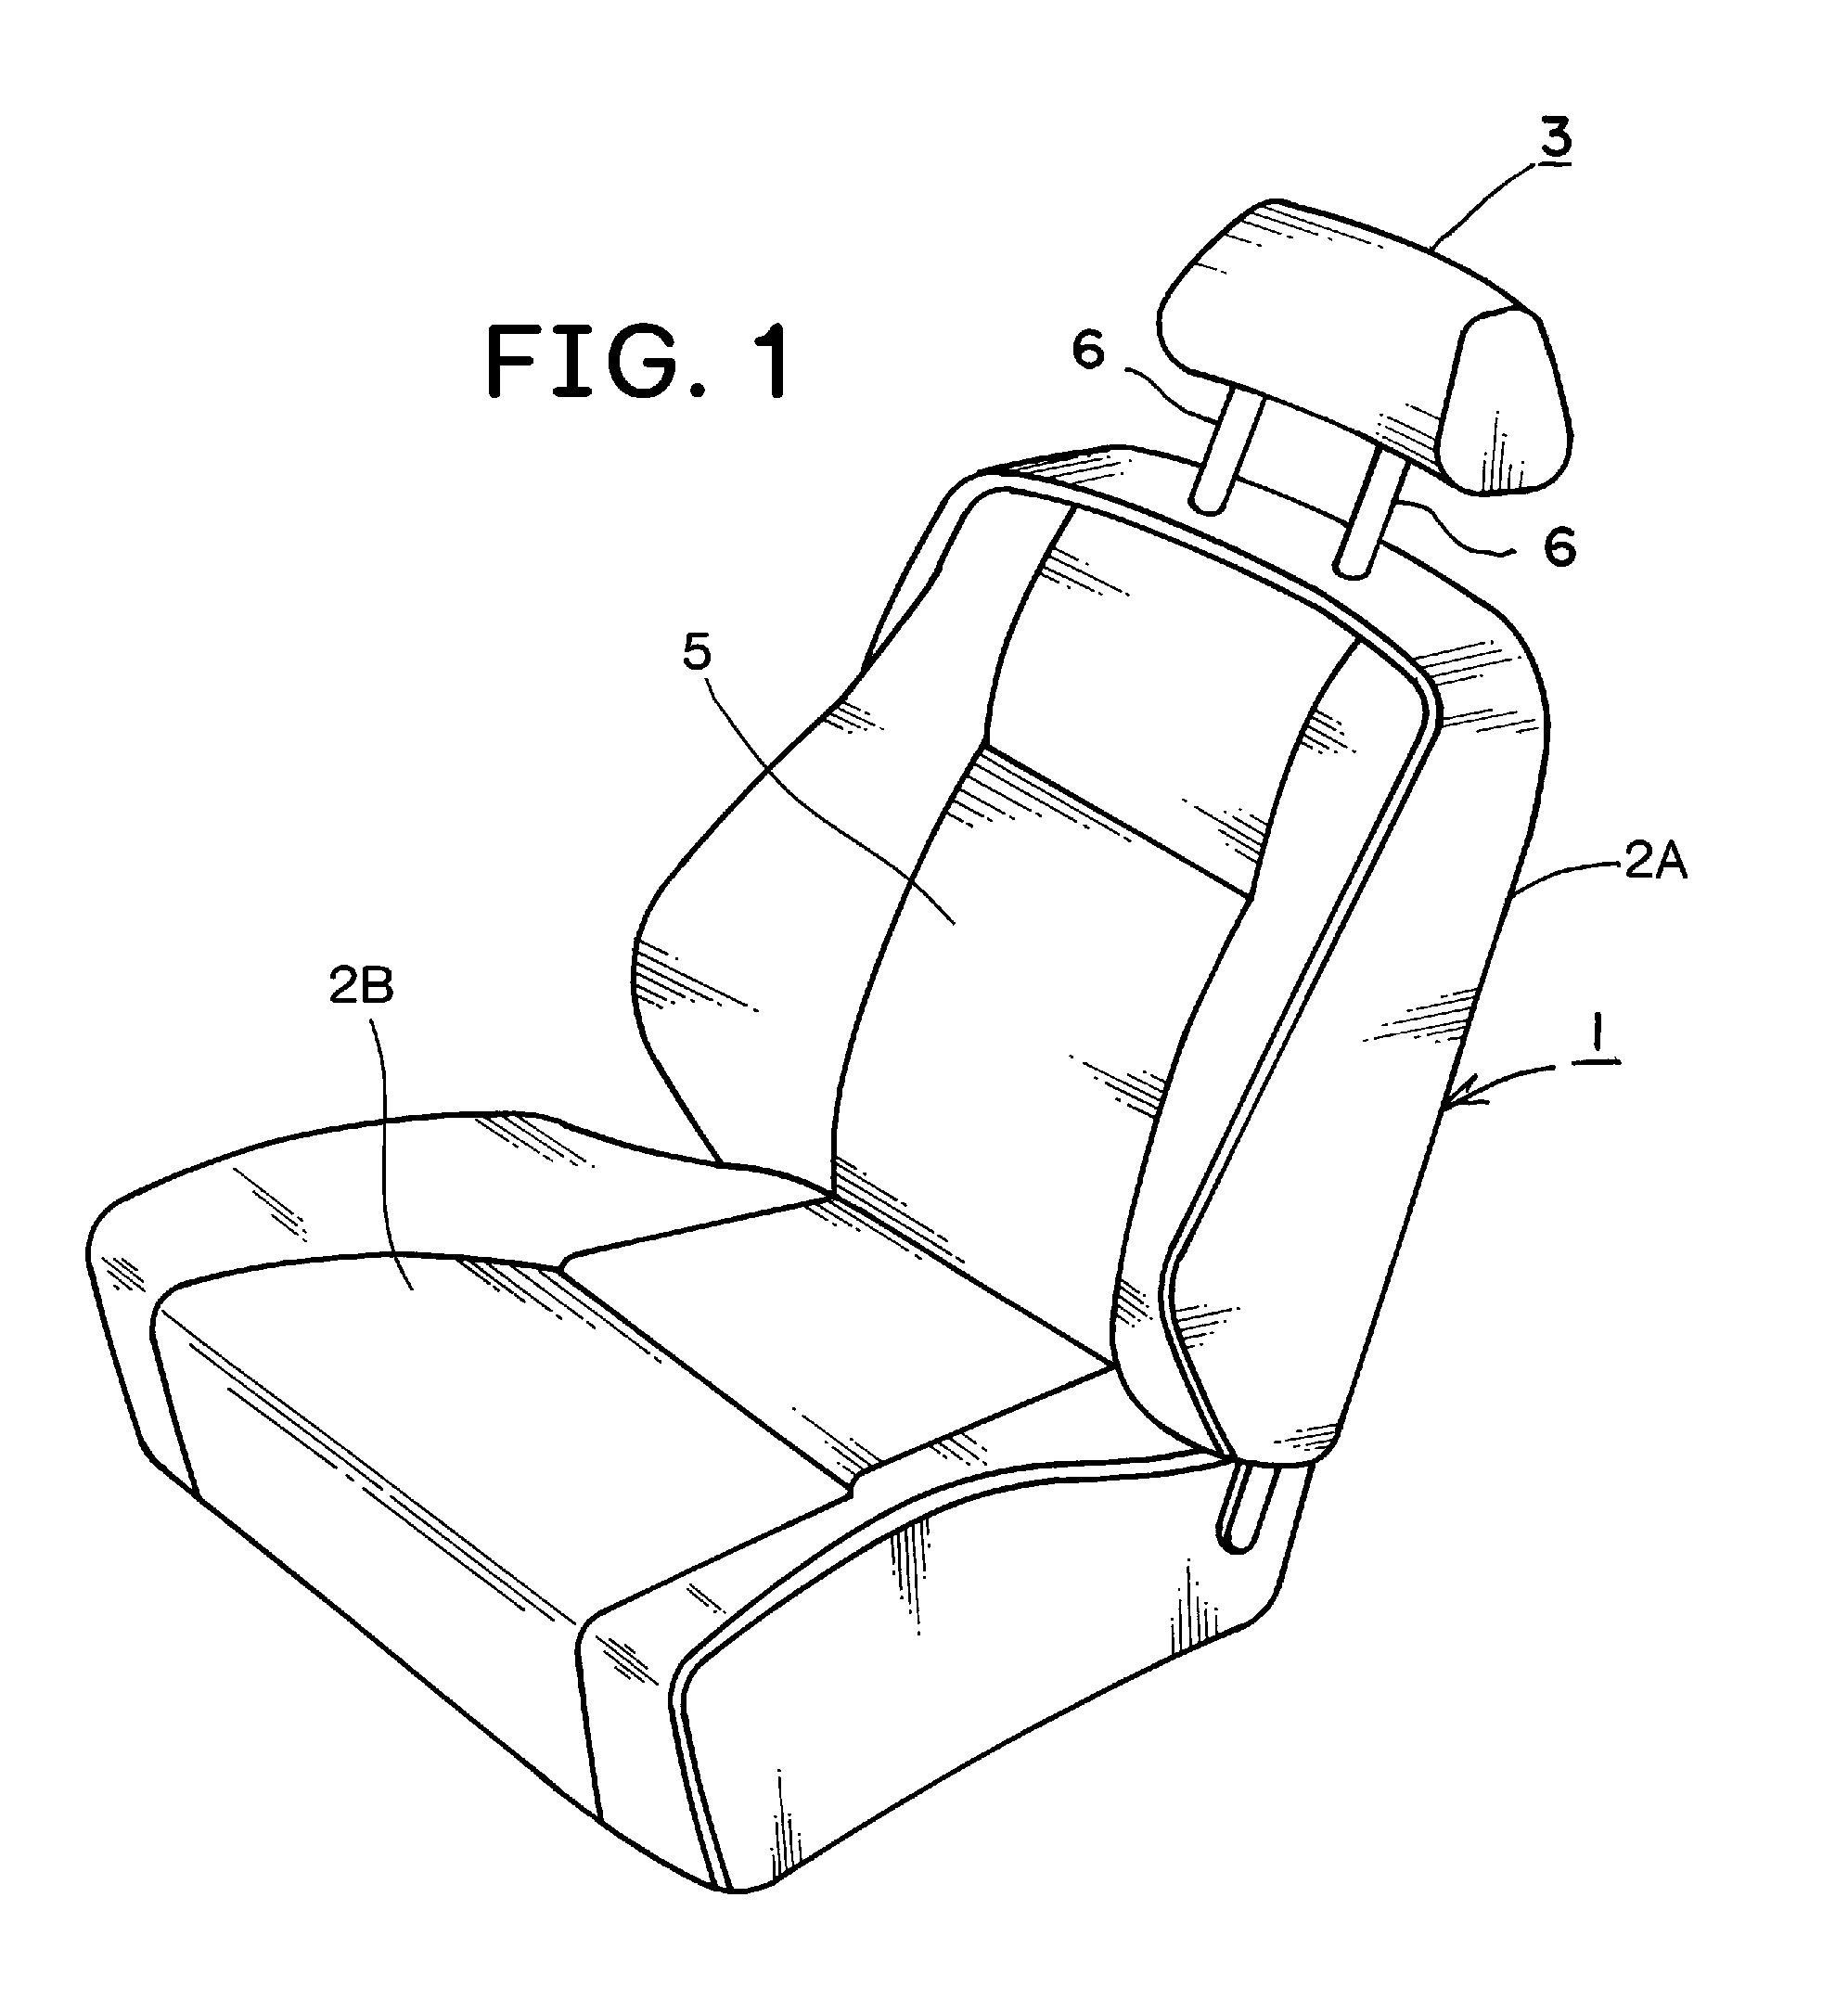 Coupling mechanism for headrest of vehicle seat